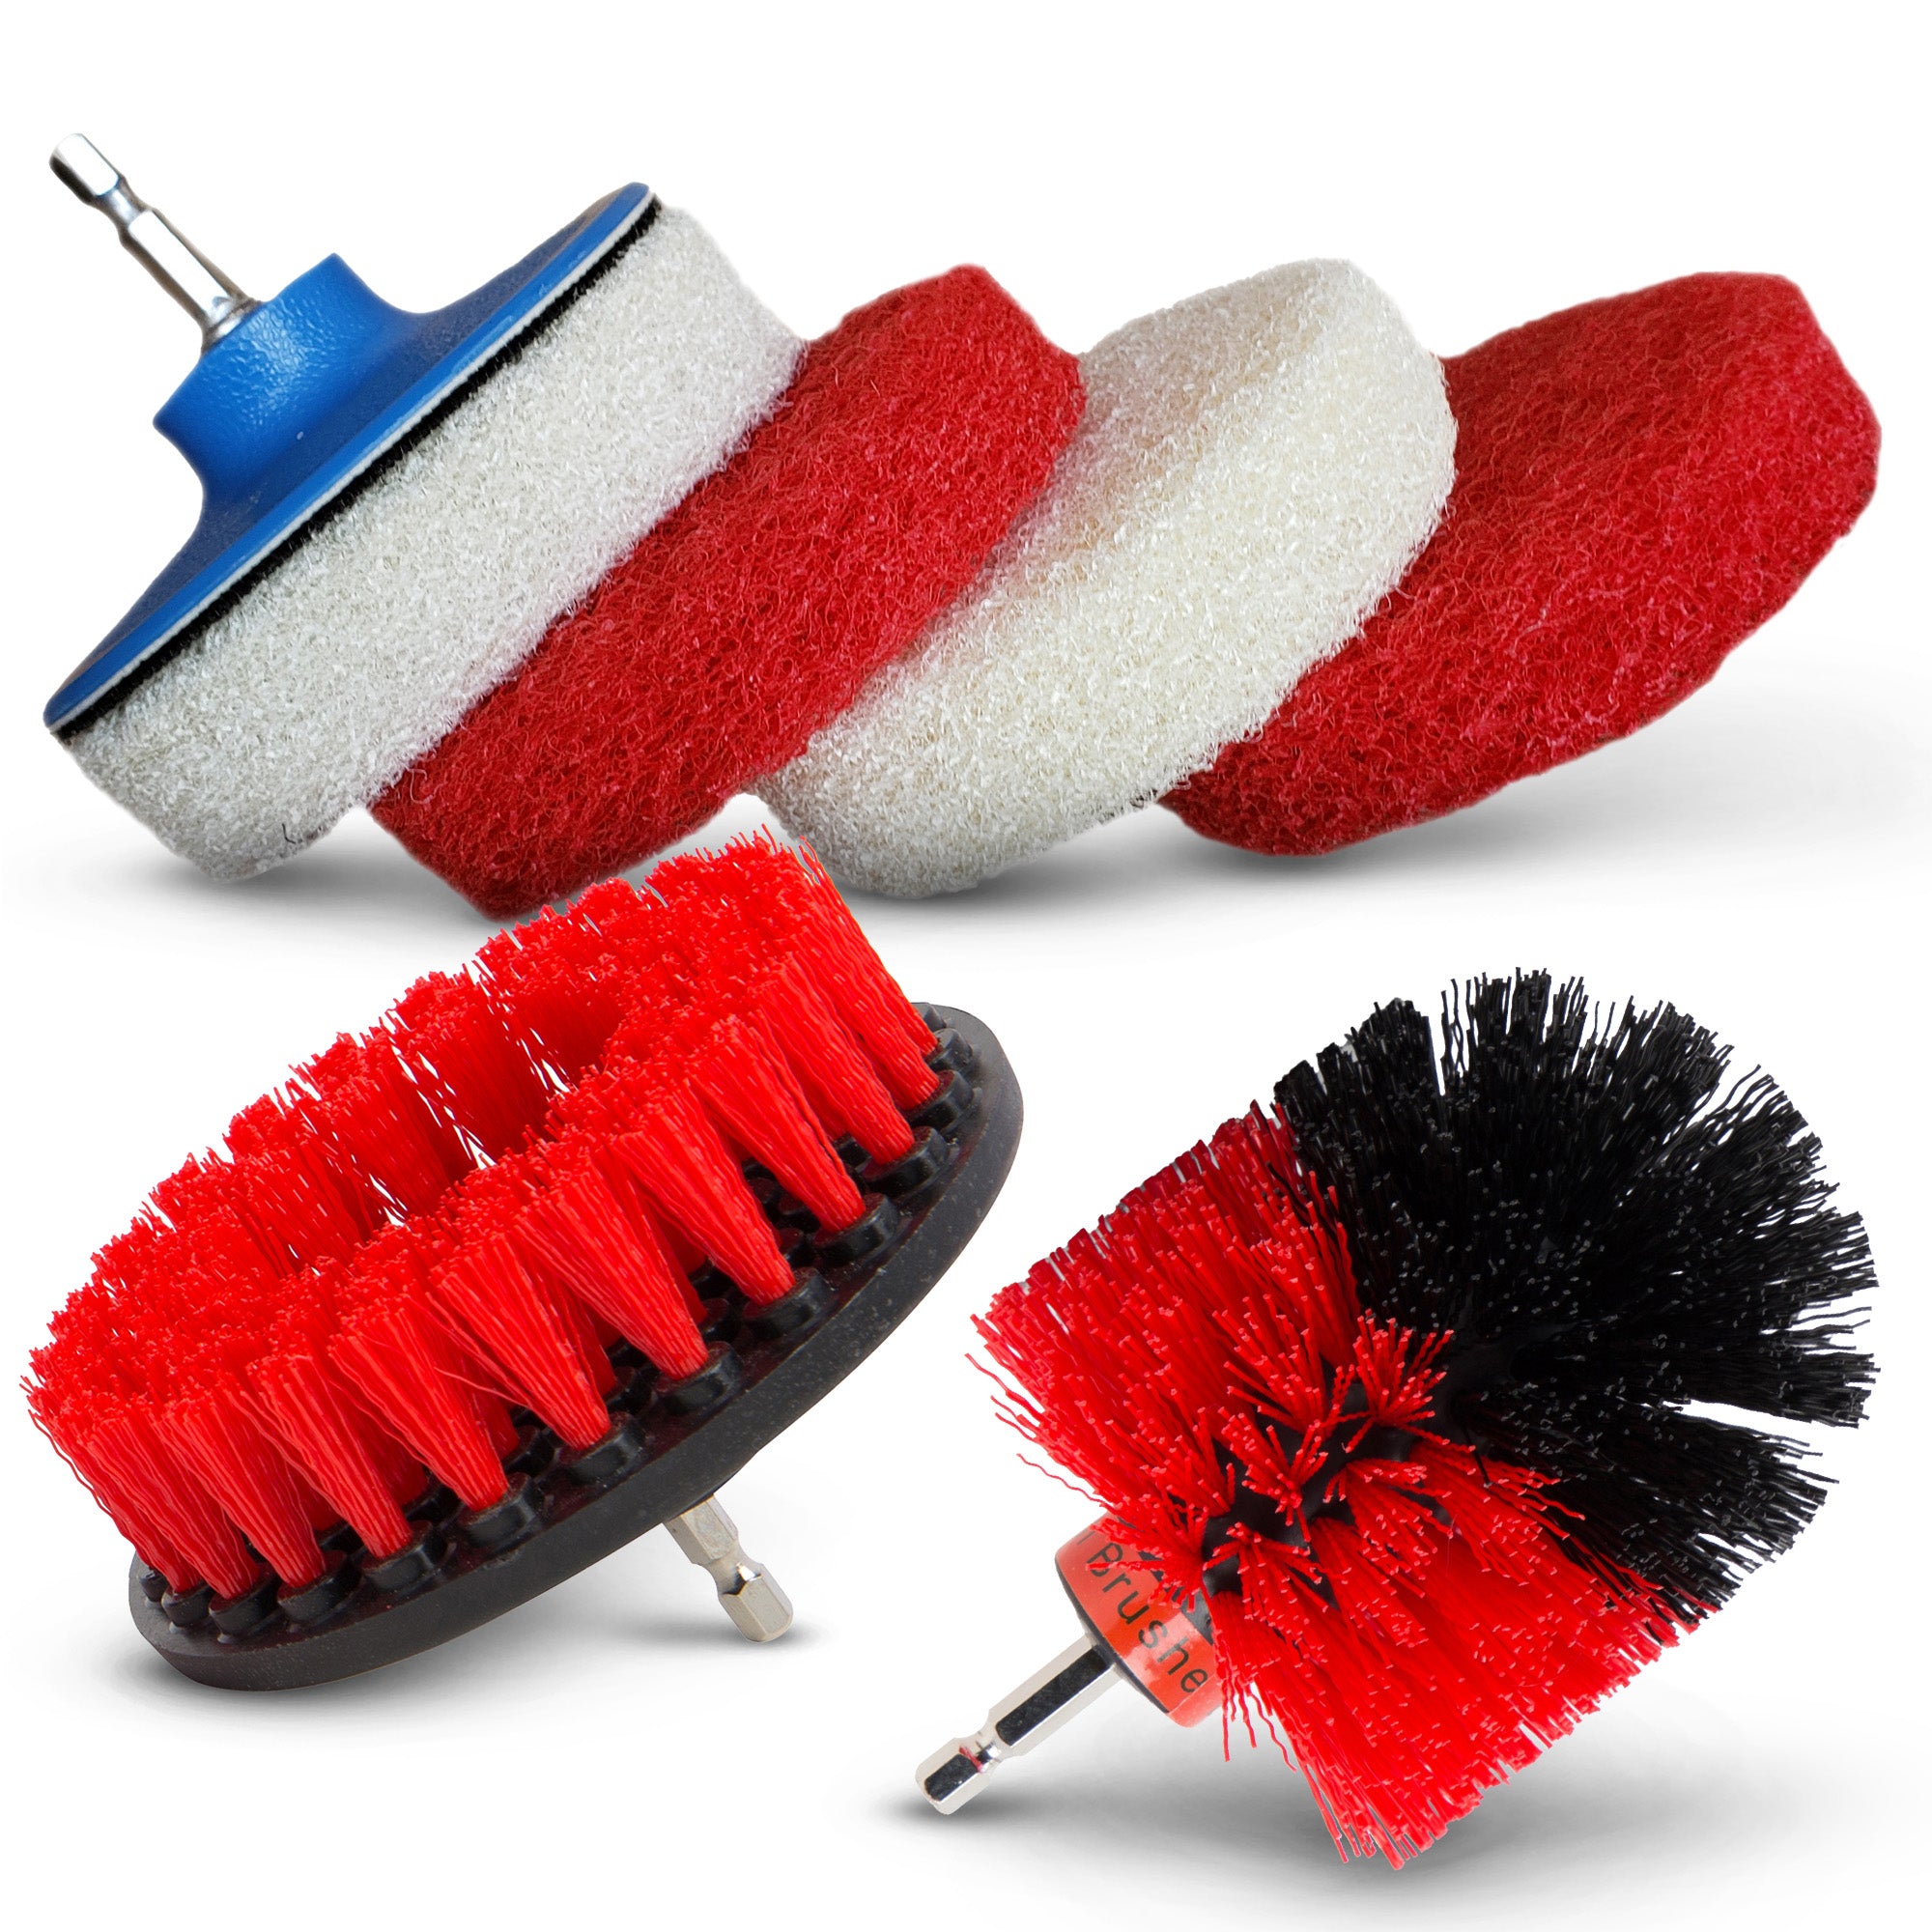 5 Pack Drill Brush Attachments Set Power Scrubber Cleaning Brush